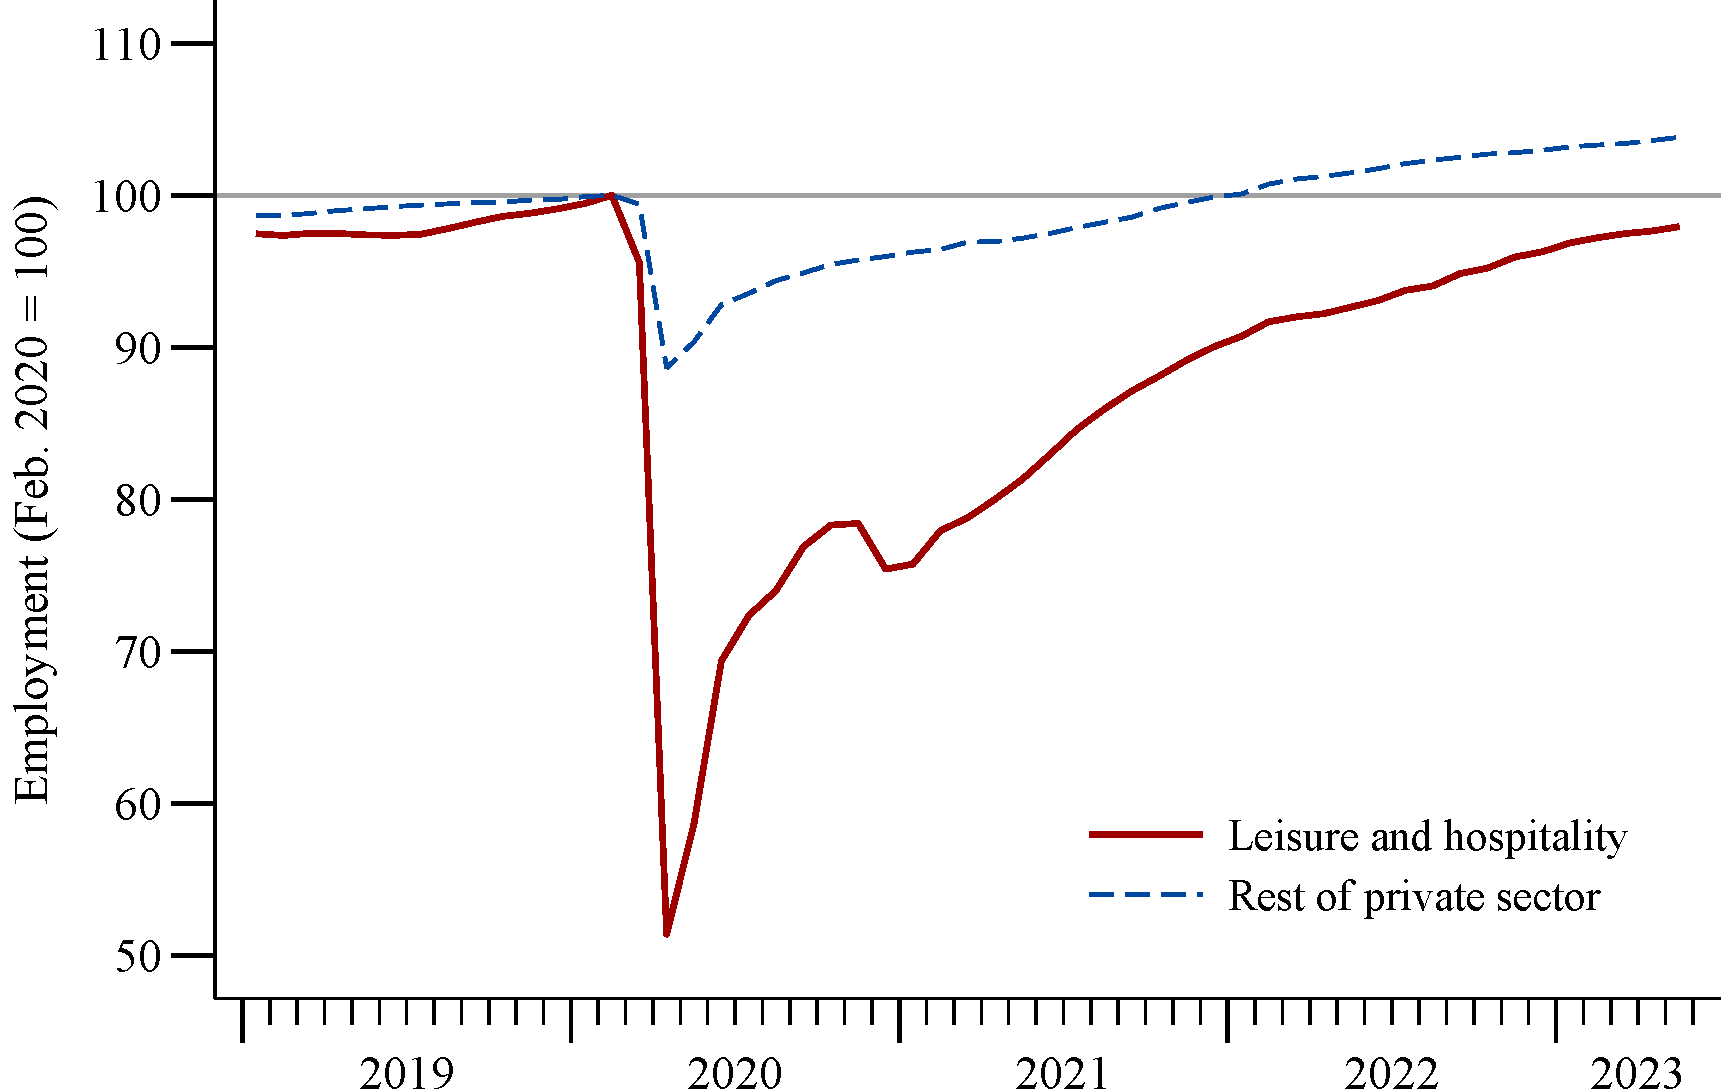 Figure 1. The shortfall in leisure and hospitality employment. See accessible link for data.